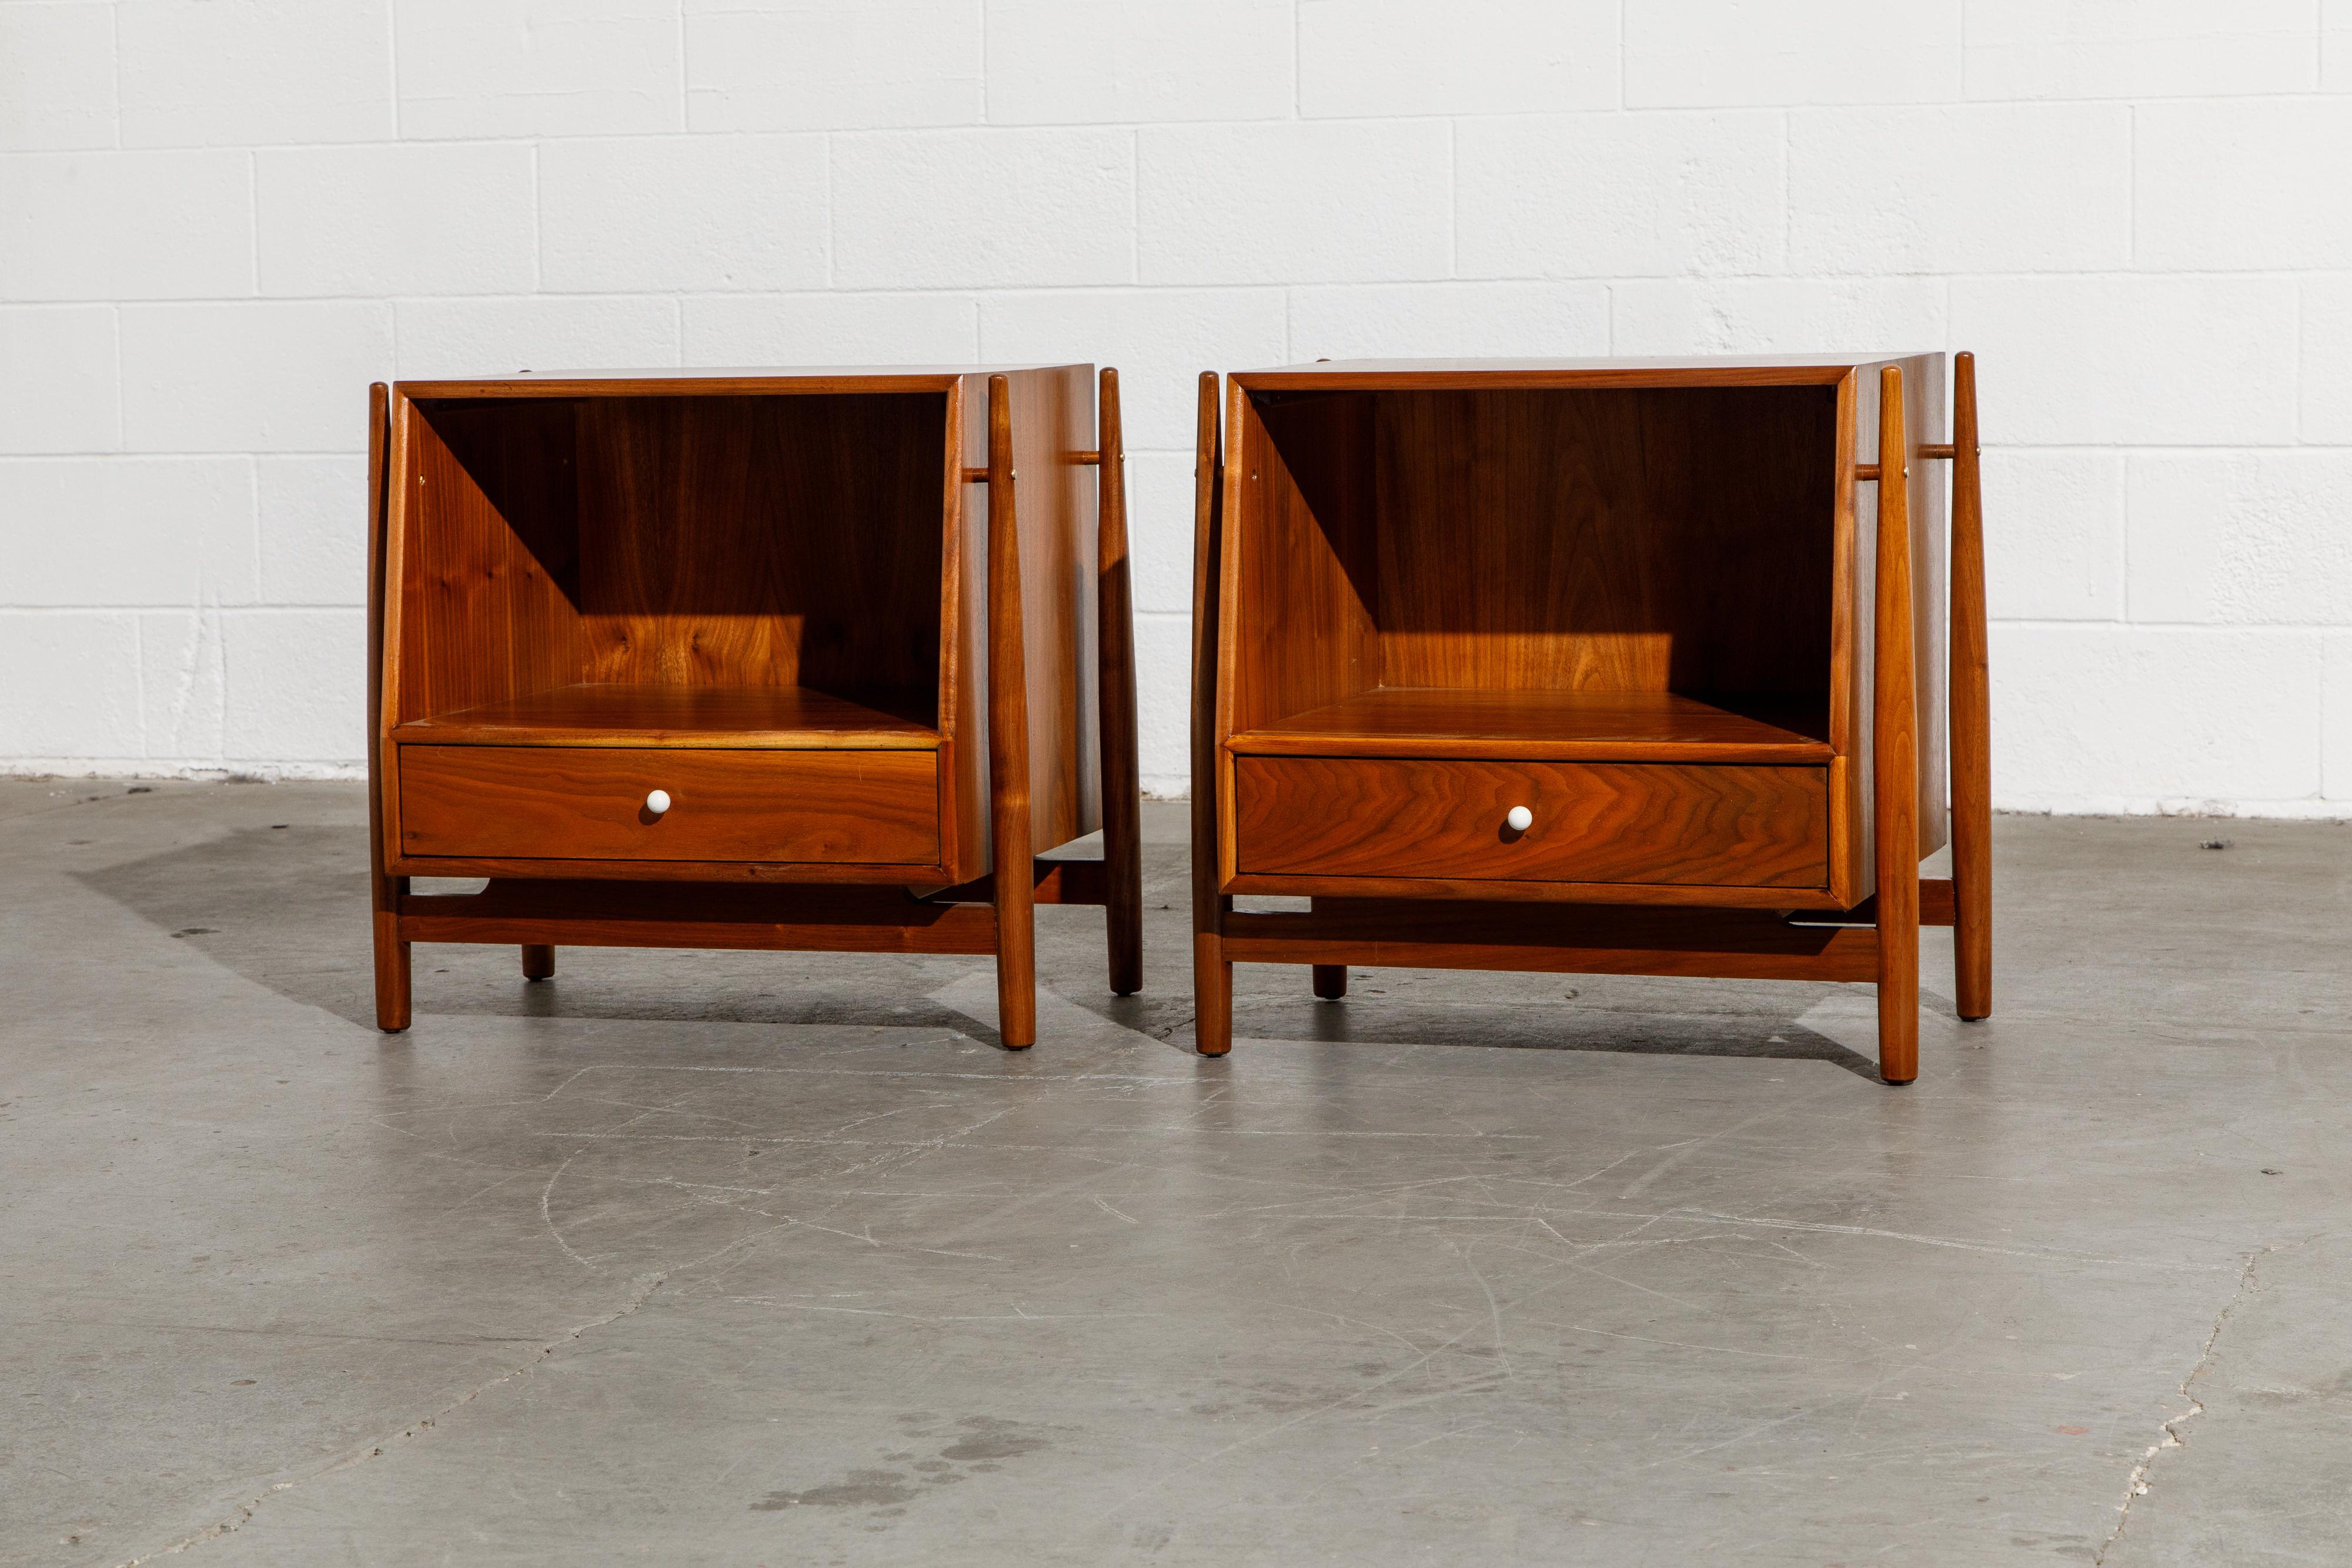 Exceptional pair of Mid-Century Modern nightstands or can also be used as side or end tables, designed by Kipp Stewart and Stewart McDougall as part of the 'Declaration' line for Drexel furniture. This design being the most coveted and in-demand of